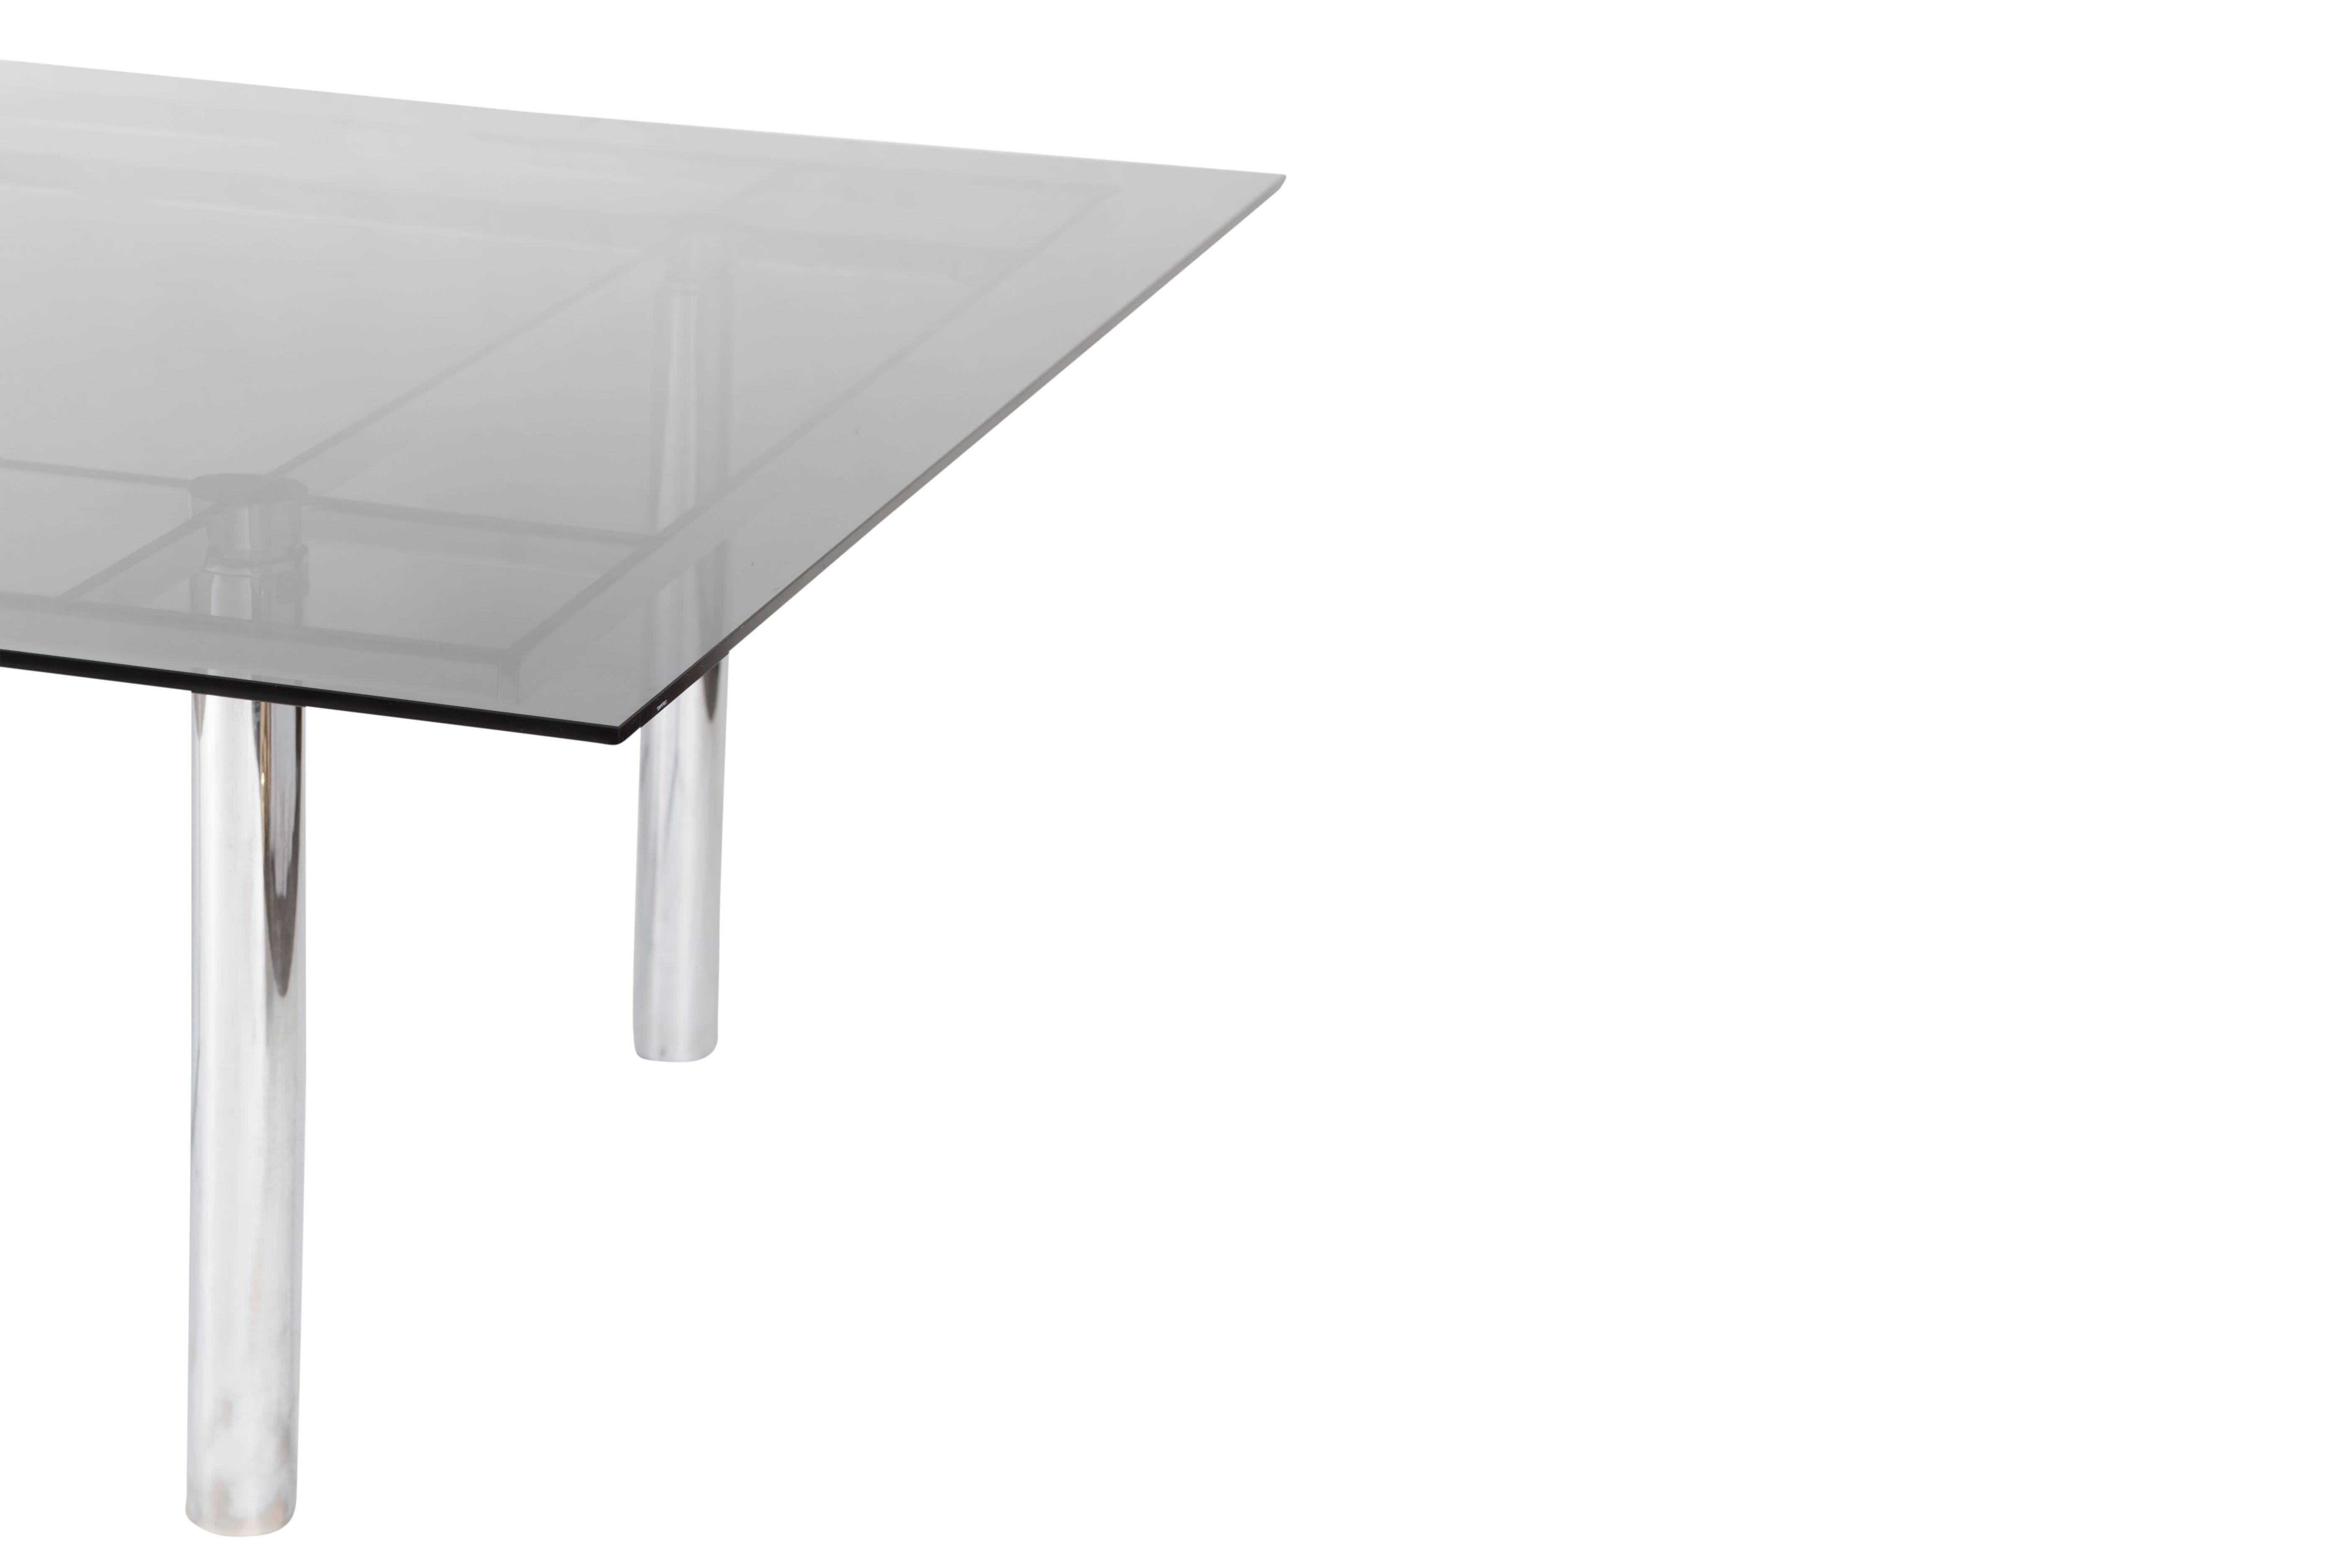 Late 20th Century Scarpa Large Square Chrome Dining Table for Knoll Model André